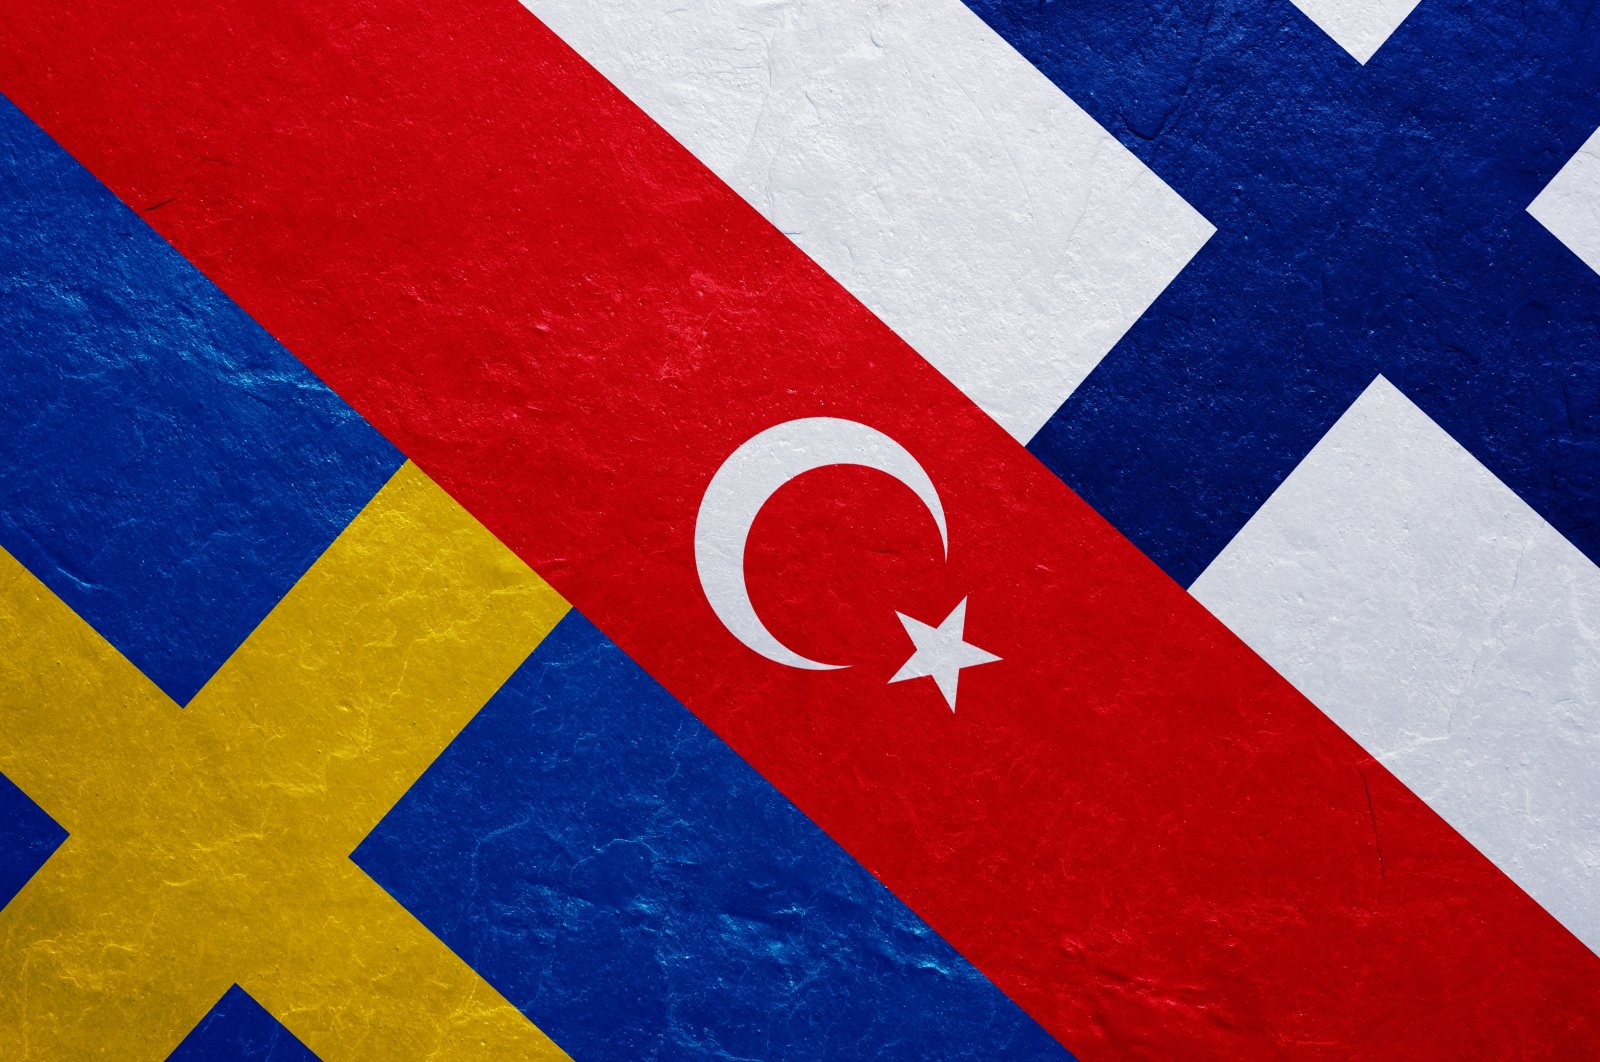 The flags of (L-R) Sweden, Turkey and Finland. (Photo by Shutterstock)